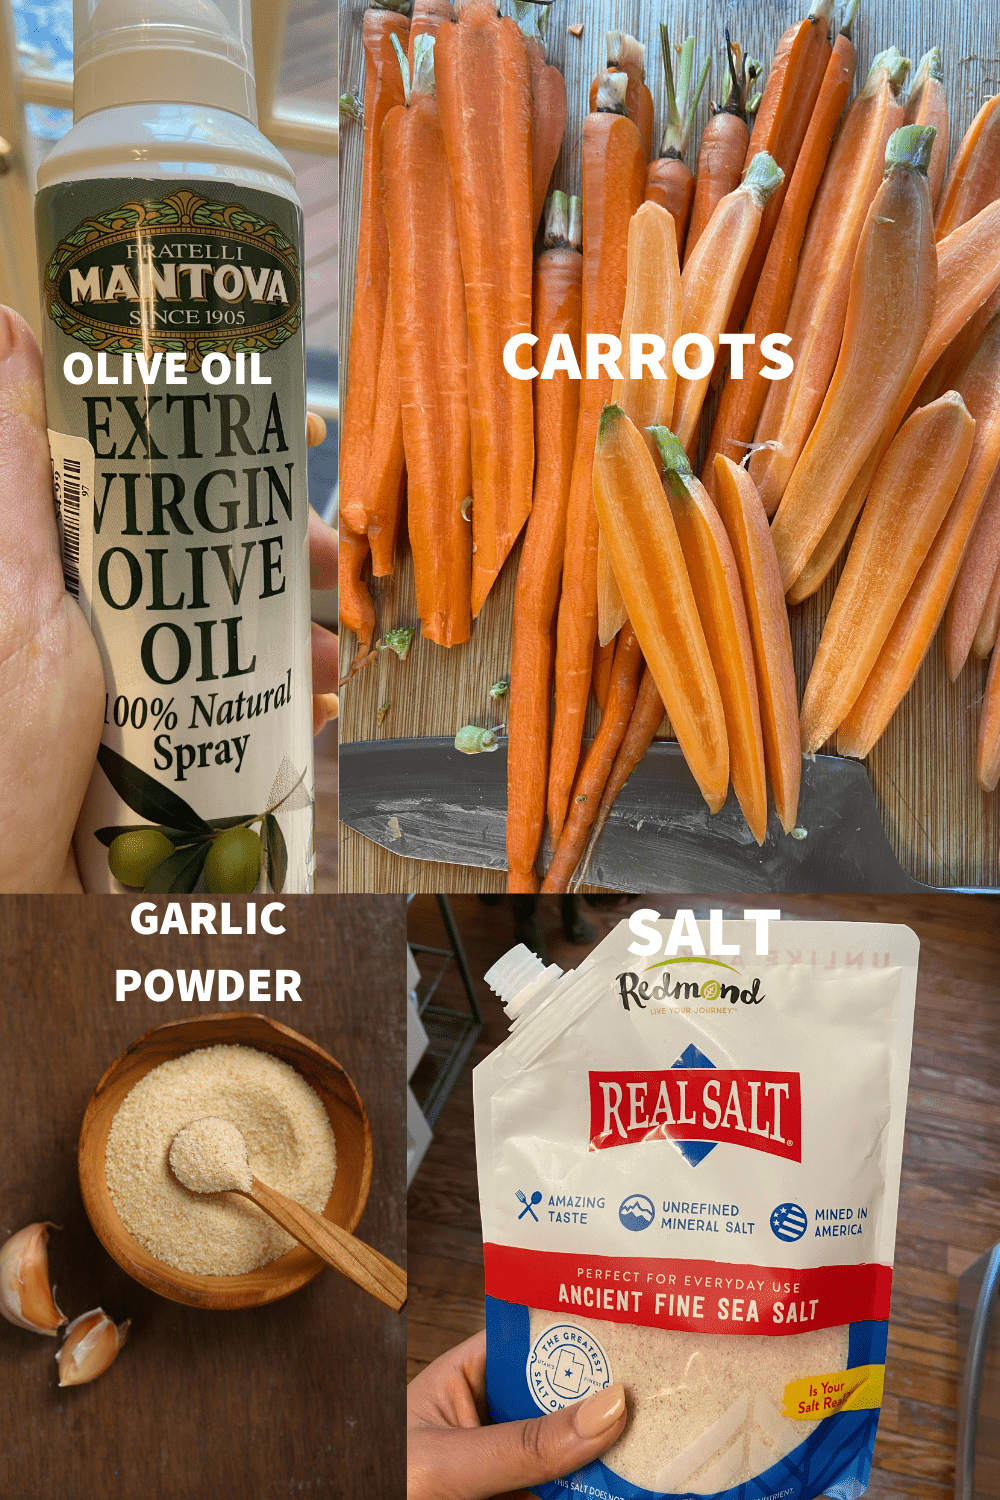 INGREDIENTS FOR ROASTED CARROTS, OLIVE OIL SPRAY, PEELED CARROTS ON A CUTTING BOARD, A. BAG OF REDMON READ SALT AND A BOWL OF GARLIC POWDER